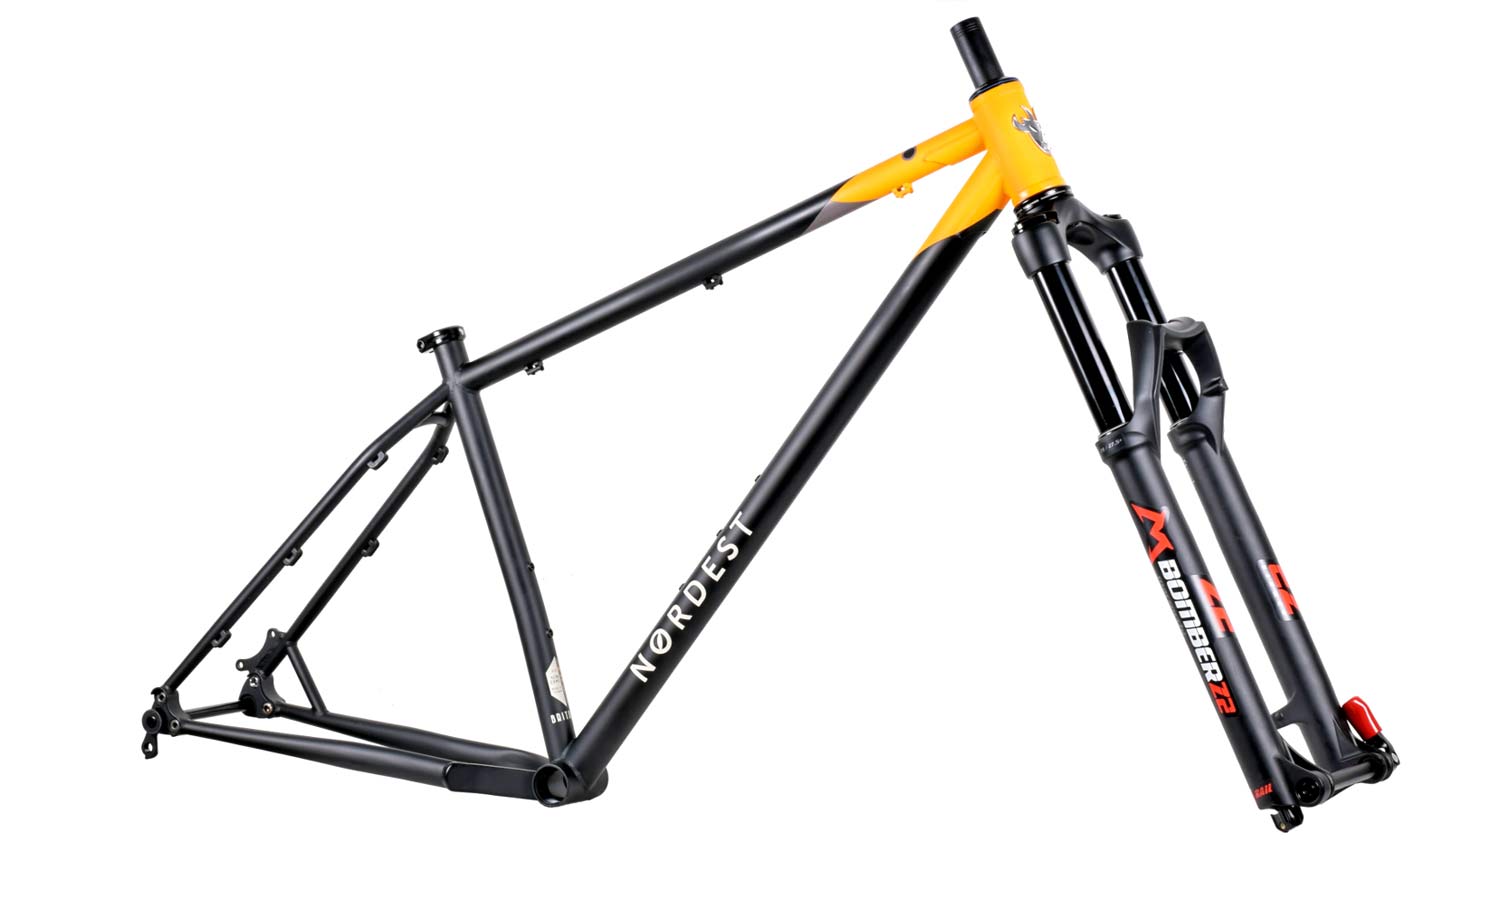 Nordest Britango TR adds trail-ready features to affordable 4130 steel mountain bike frame